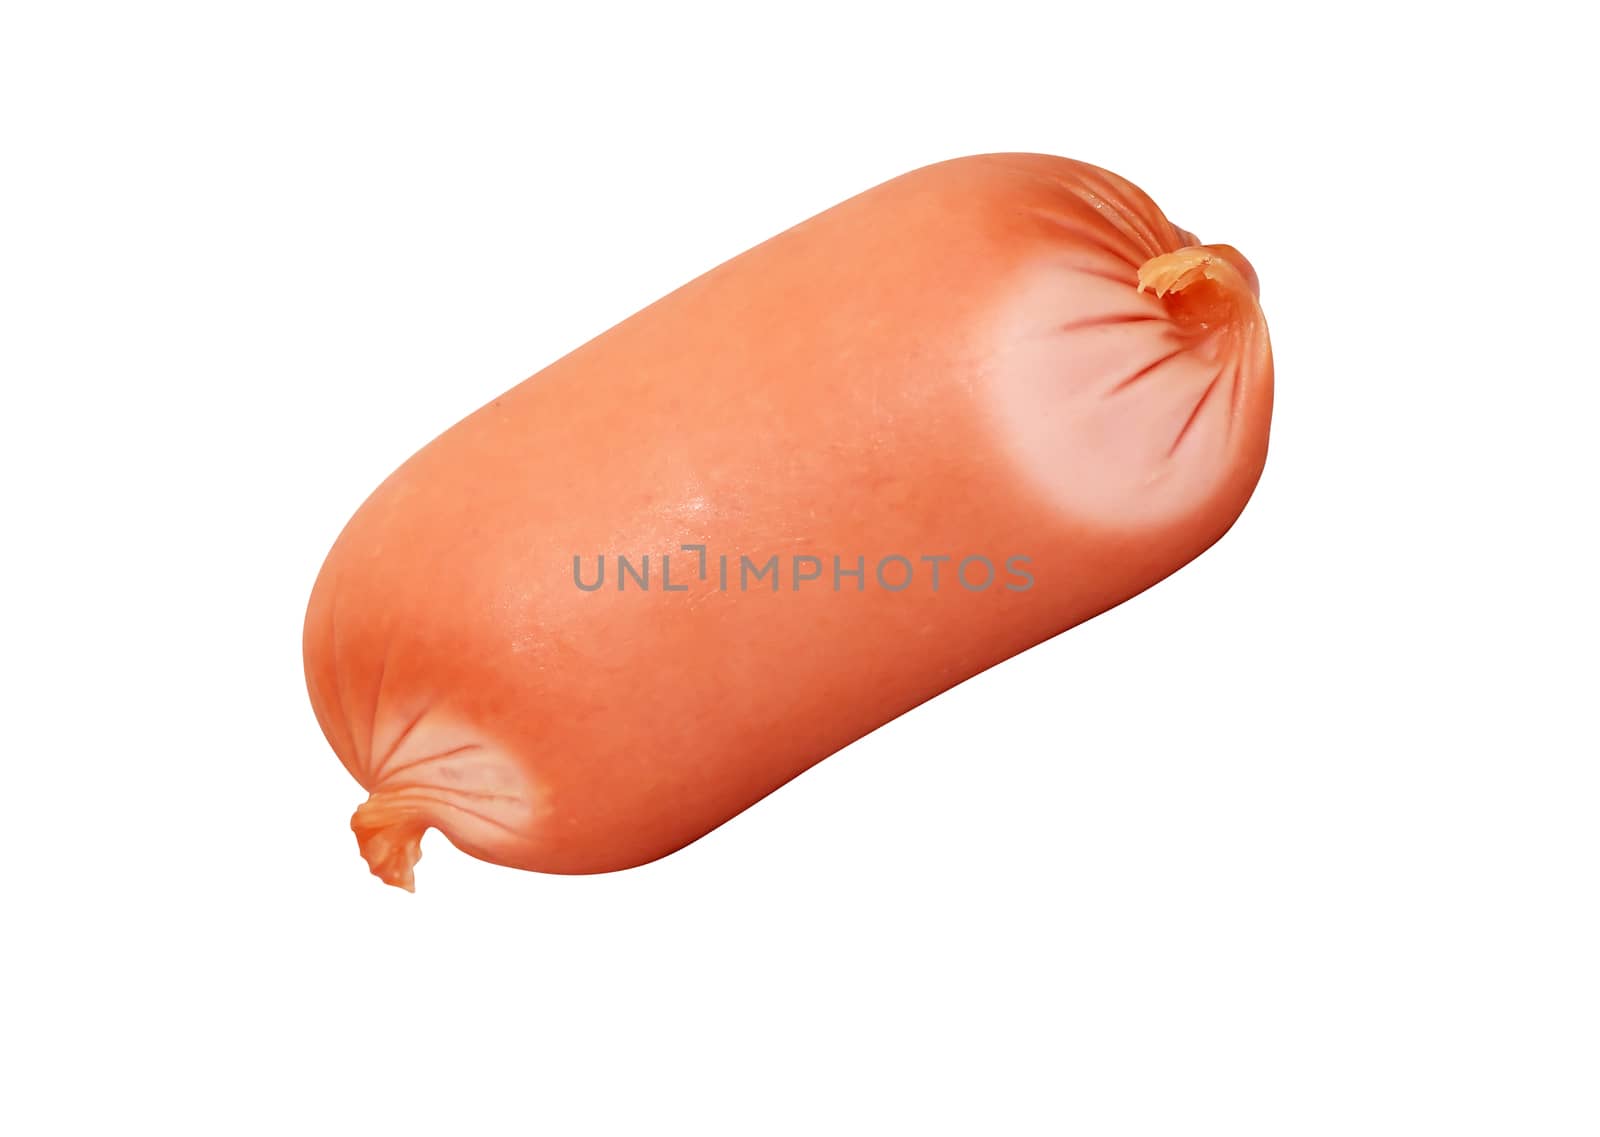 Freshness pork sausage isolated on white background with clipping path